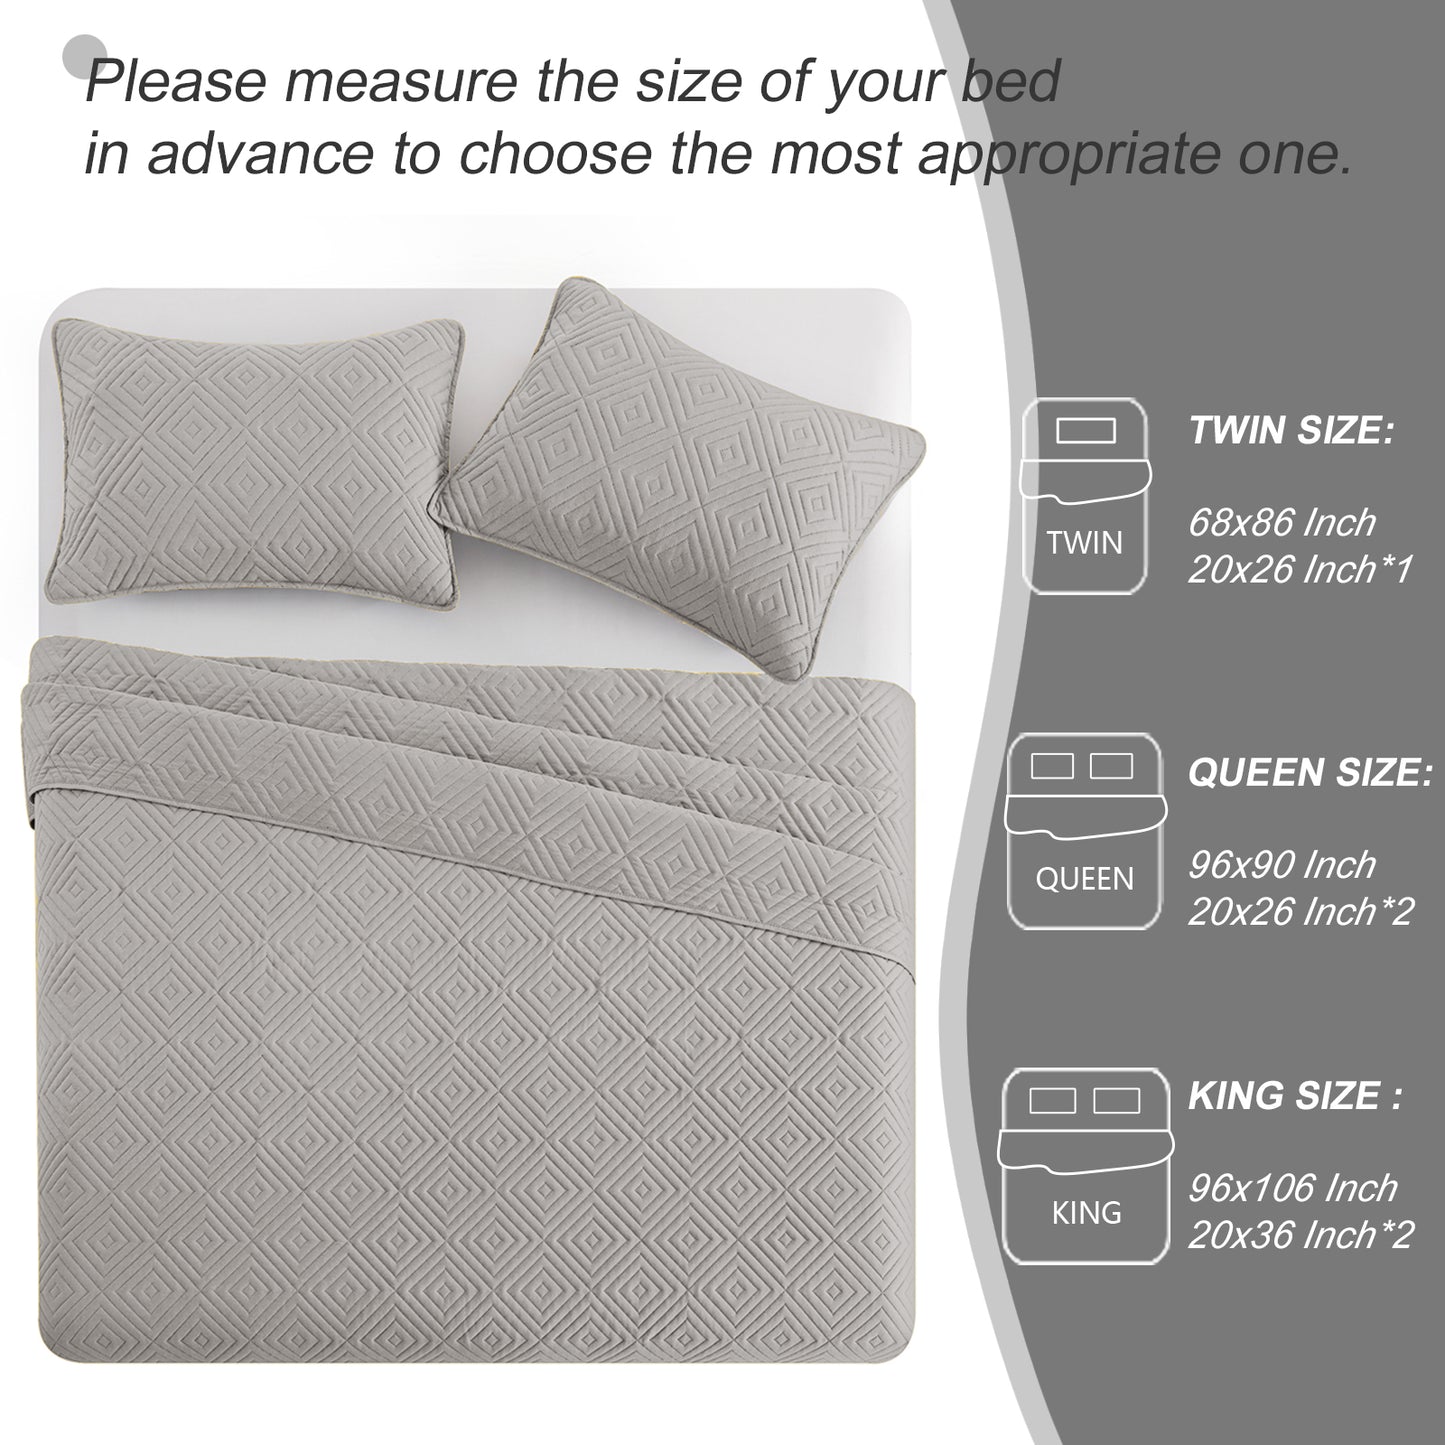 Exclusivo Mezcla 2-Piece Light Gray Twin Size Quilt Set, Square Pattern Ultrasonic Lightweight and Soft Quilts/Bedspreads/Coverlets/Bedding Set (1 Quilt, 1 Pillow Sham) for All Seasons